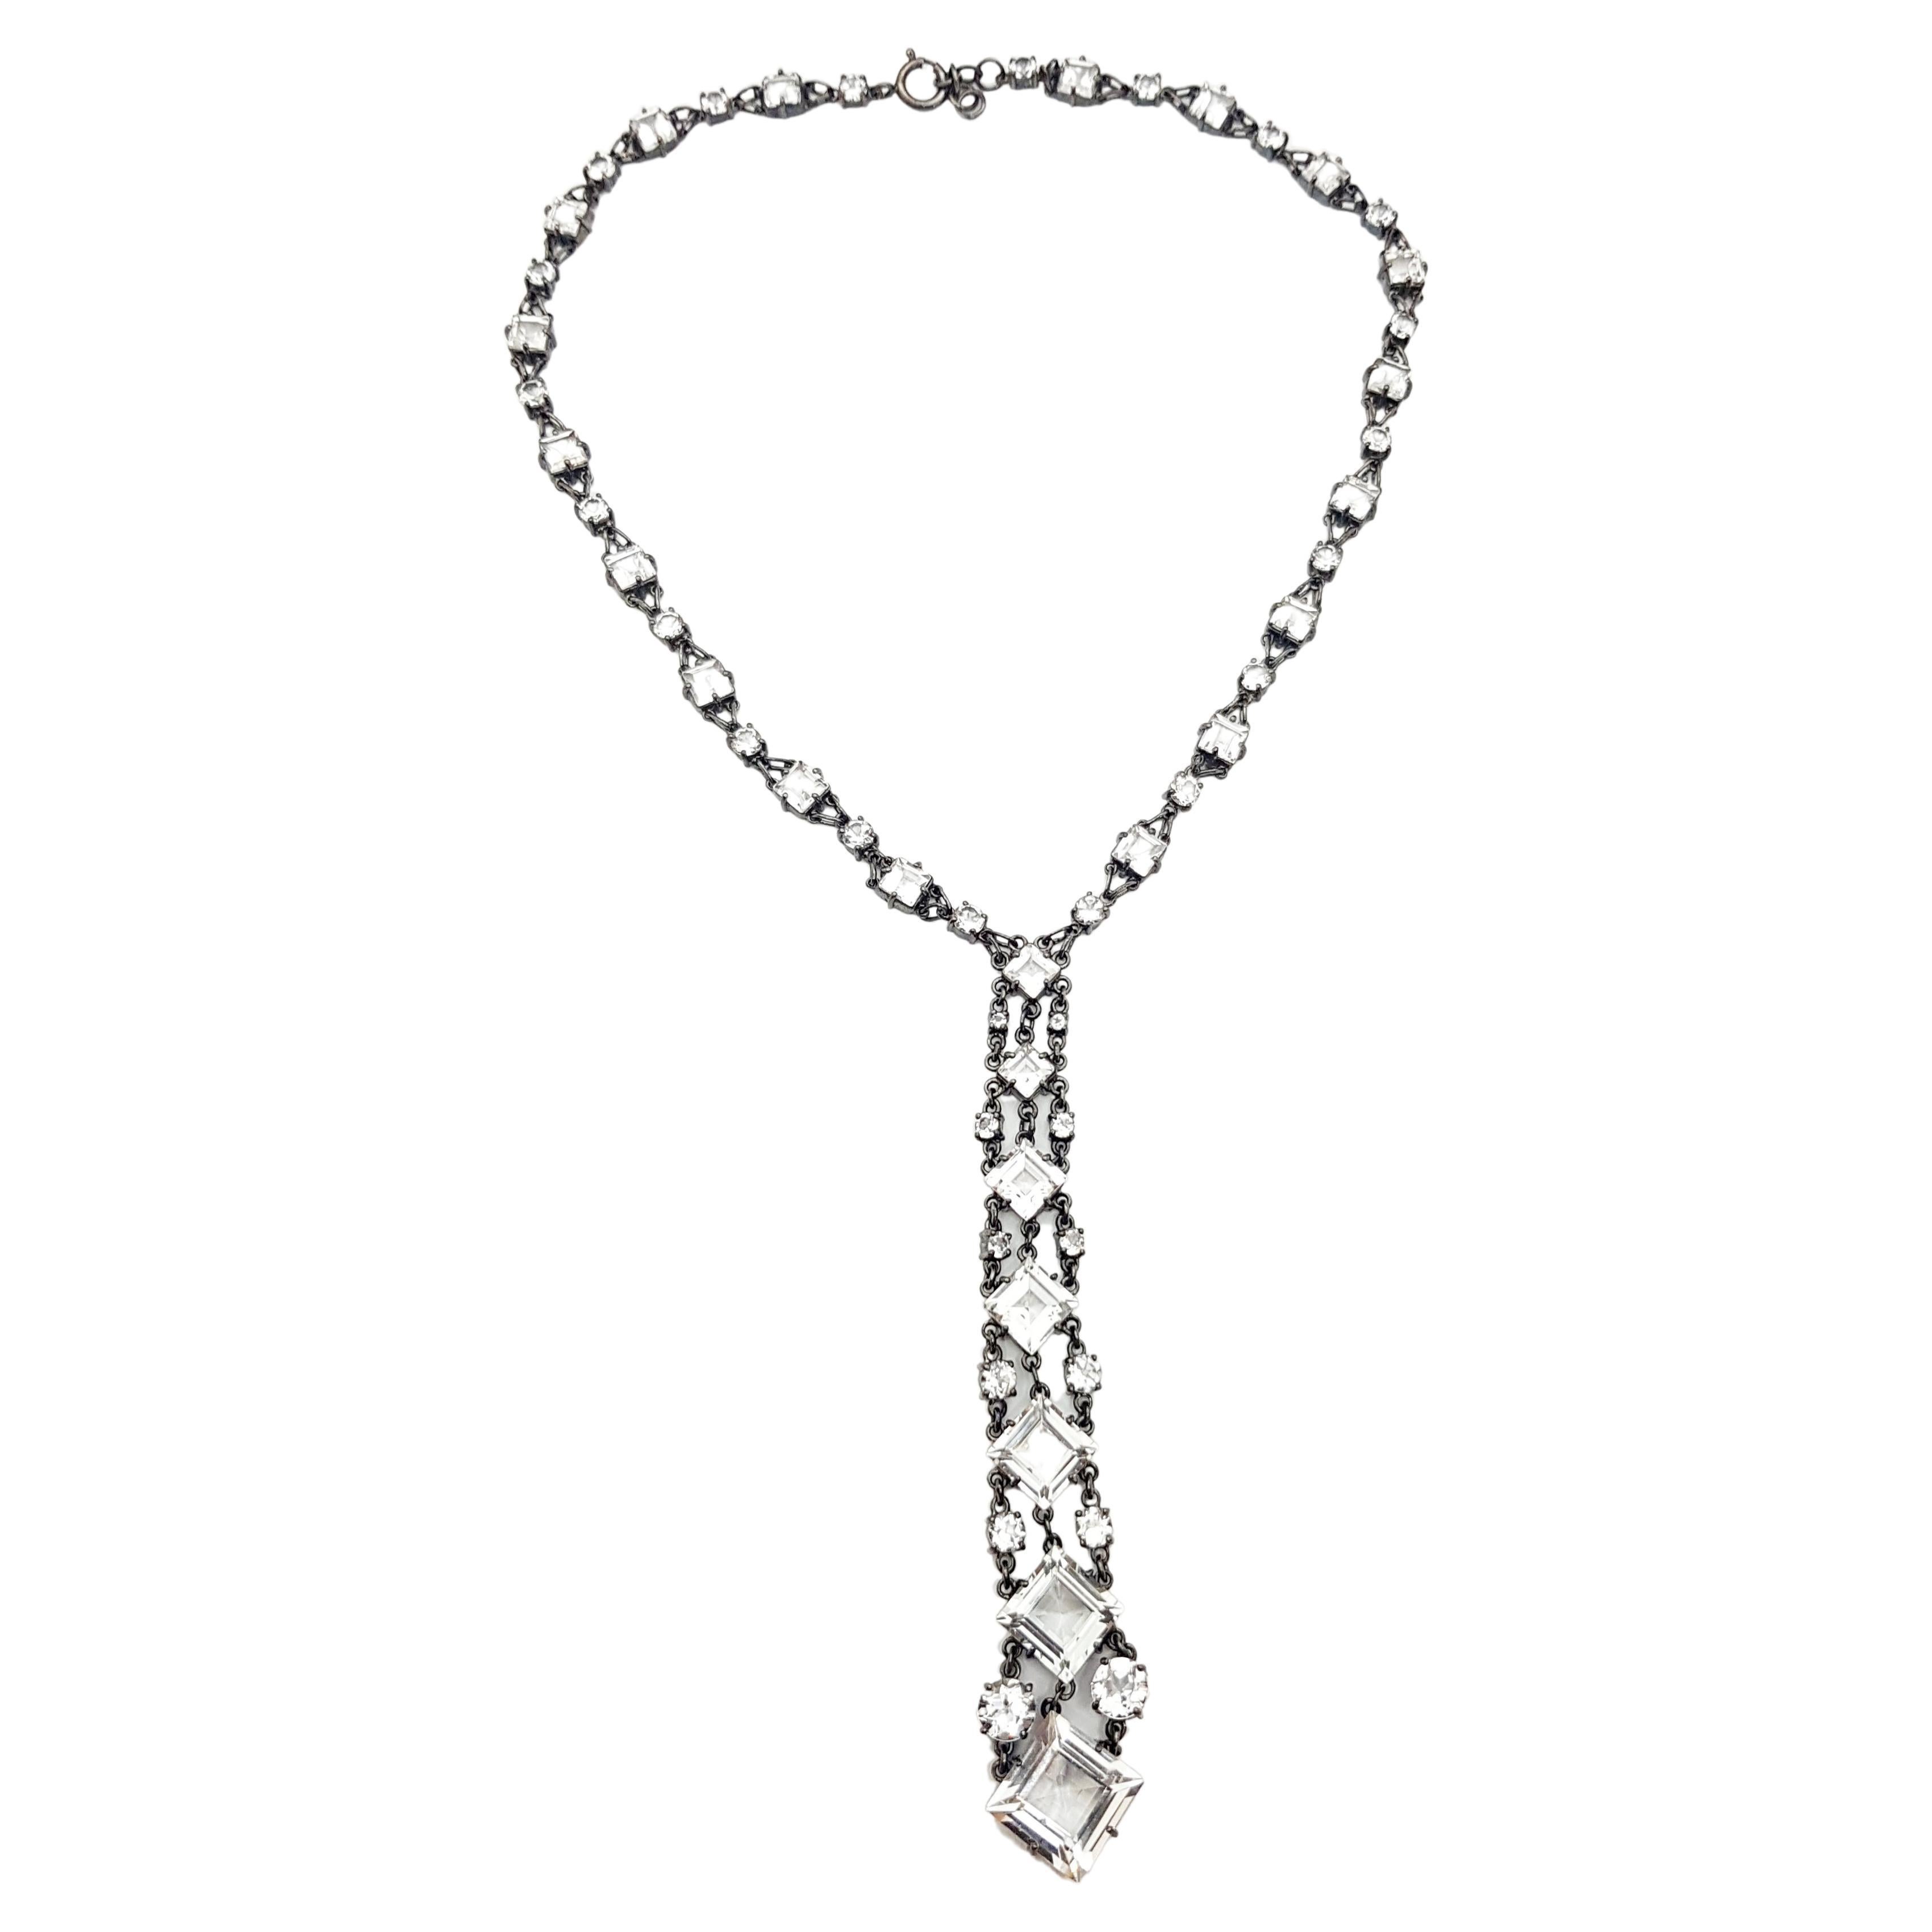 White Topaz Necklace set in Silver Settings